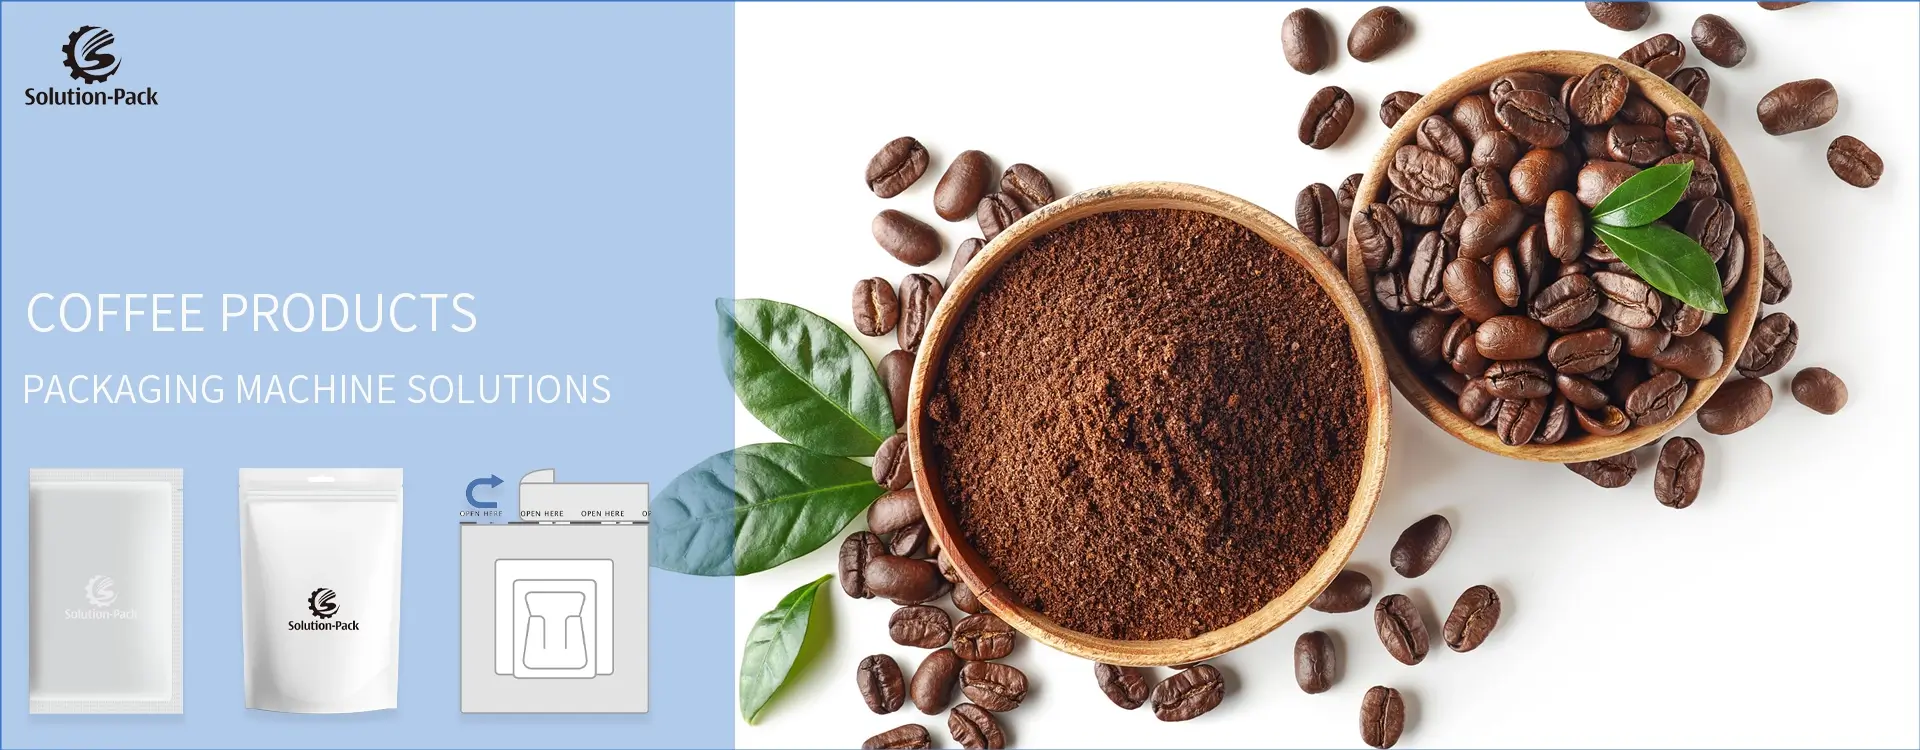 (Solution-Pack) Coffee Powder Automatic Packaging Machine Solutions Heading Banner Picture